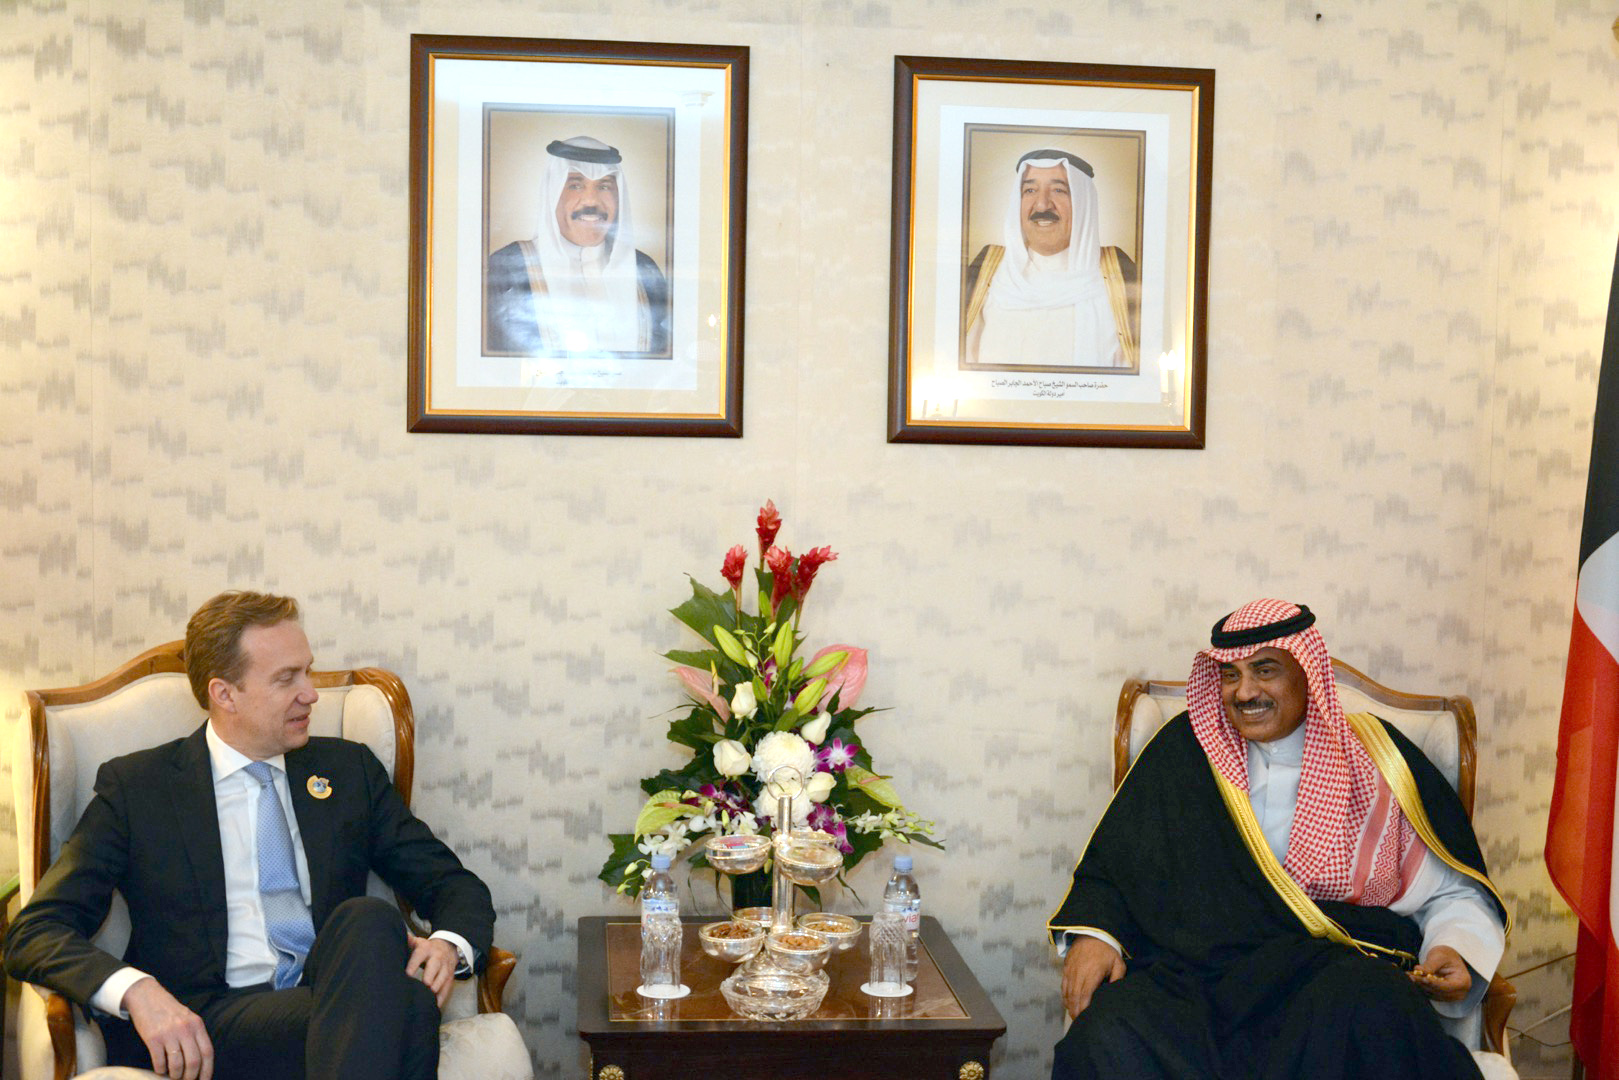 First Deputy Prime Minister and Foreign Minister Sheikh Sabah Khaled Al-Hamad Al-Sabah with Norwegian Foreign Minister Borge Brende